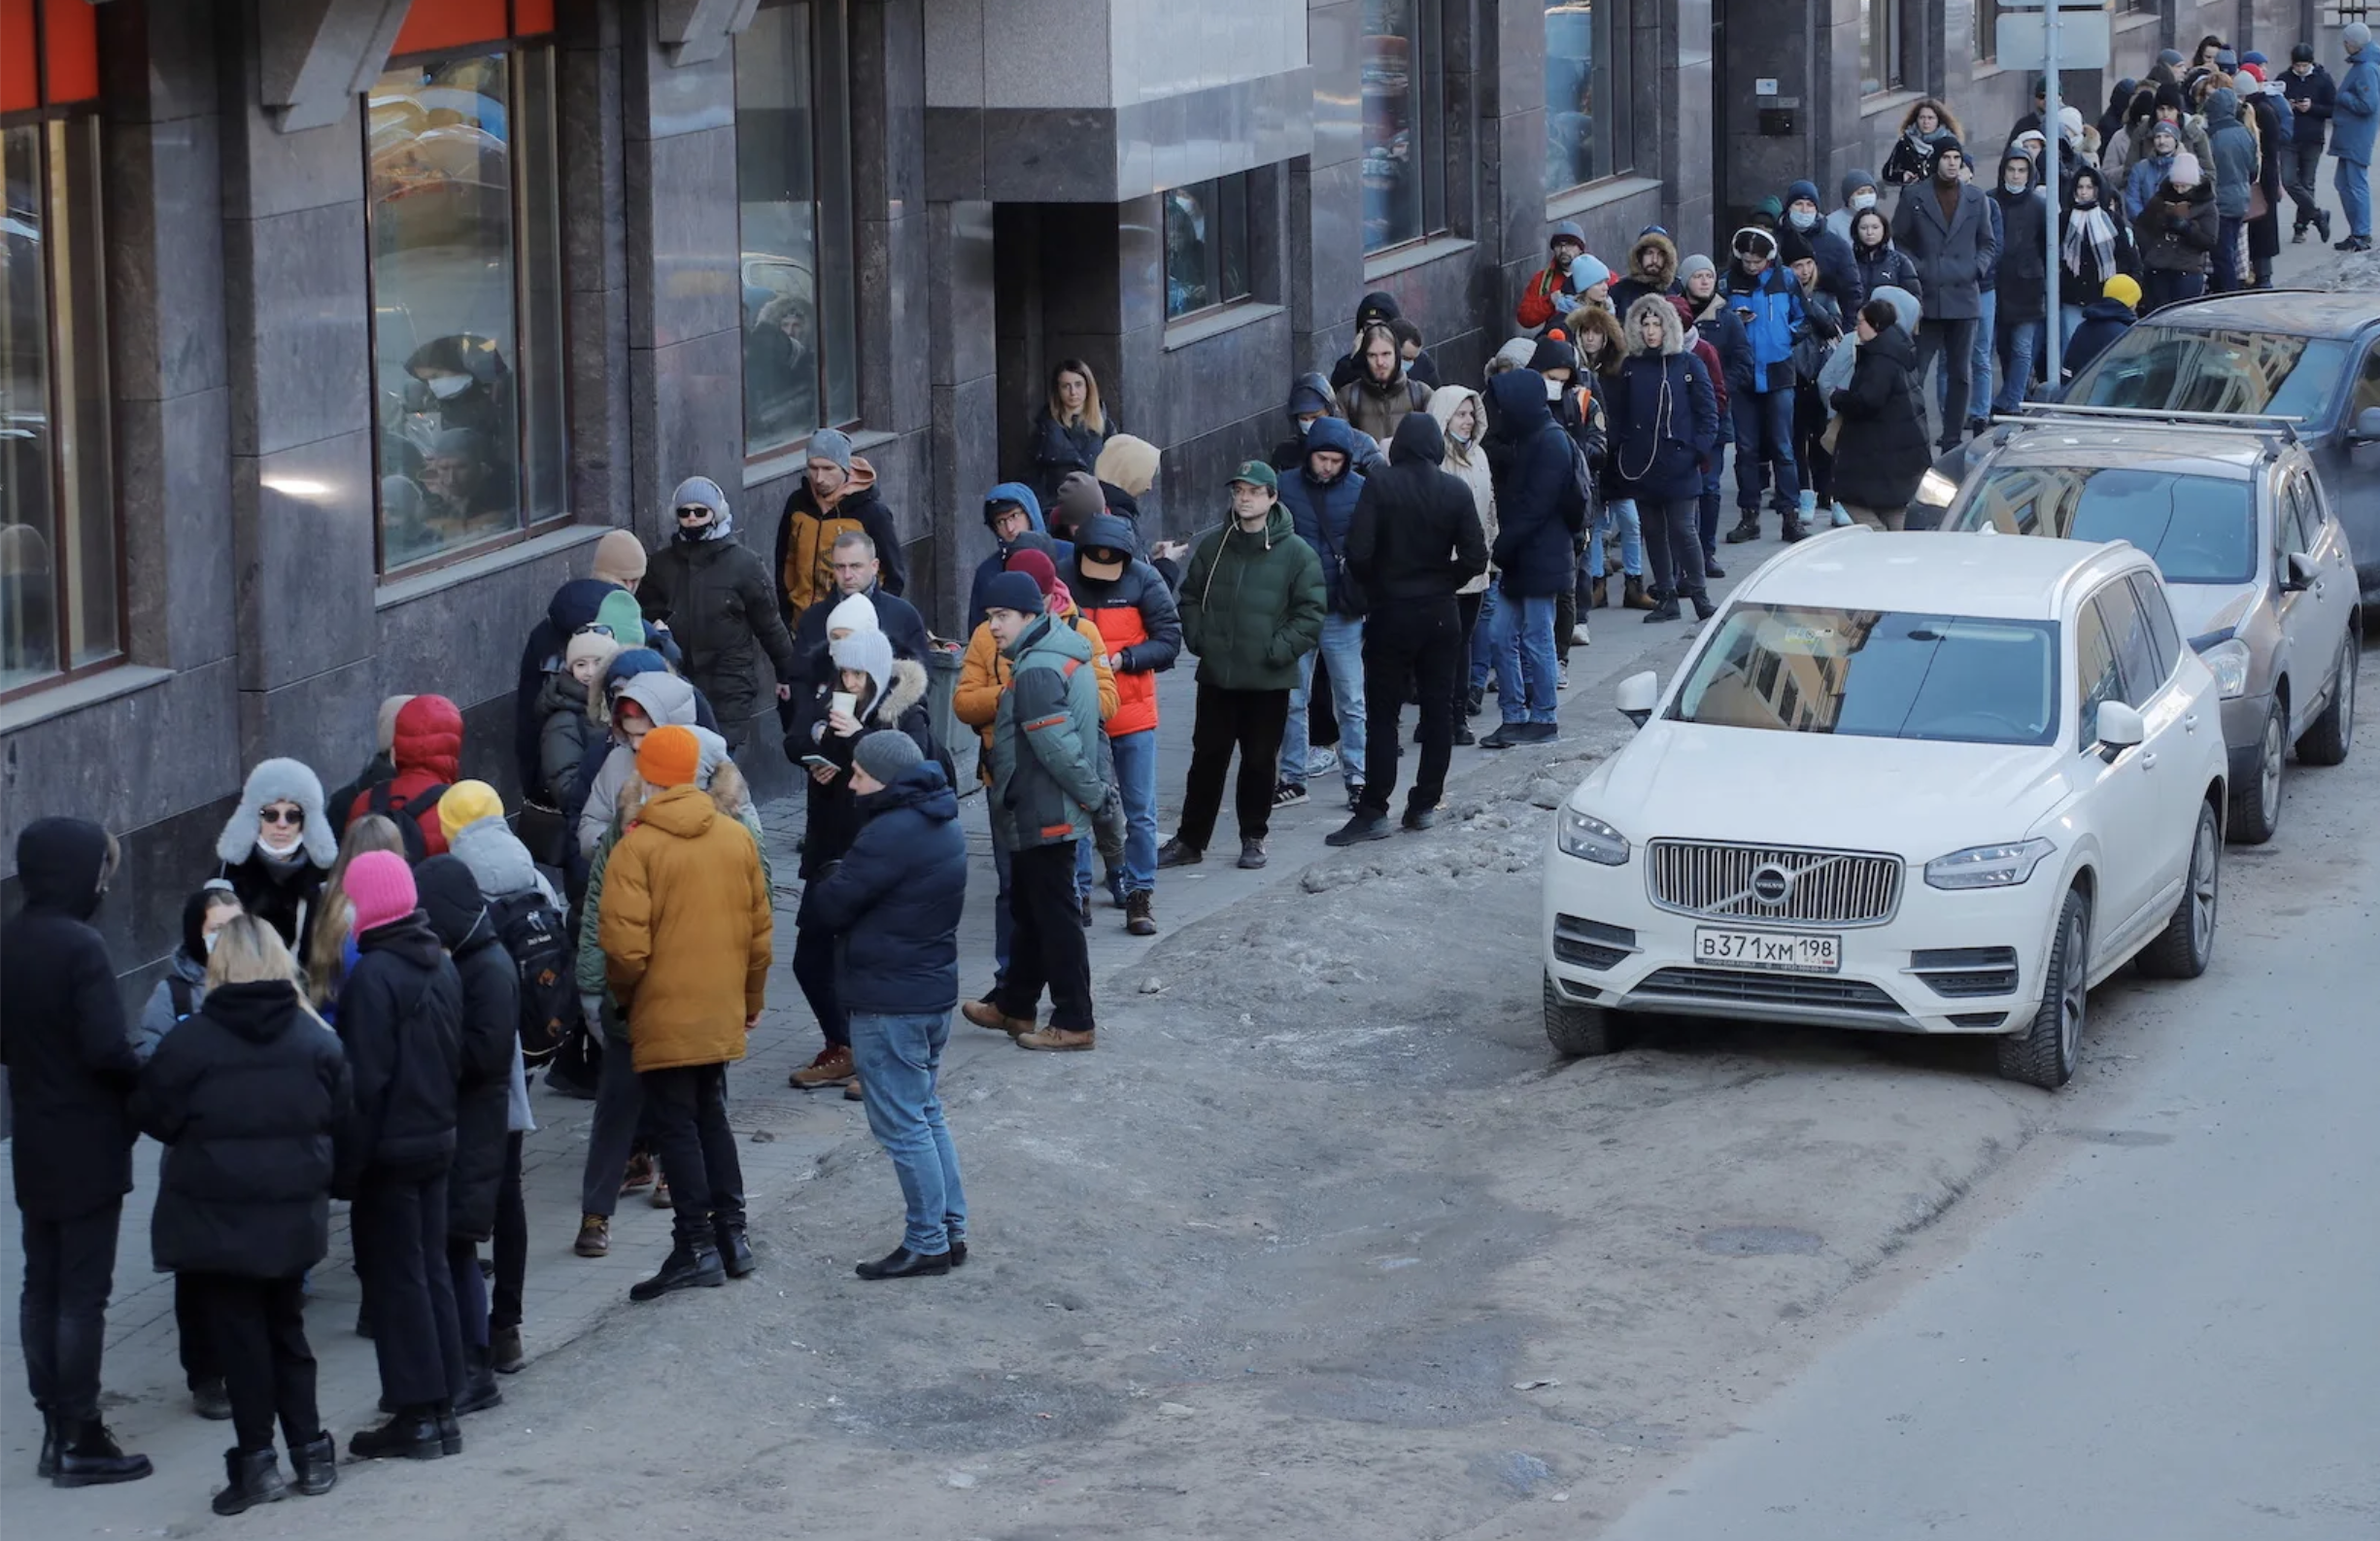 Bank queues in Russia, March 2022